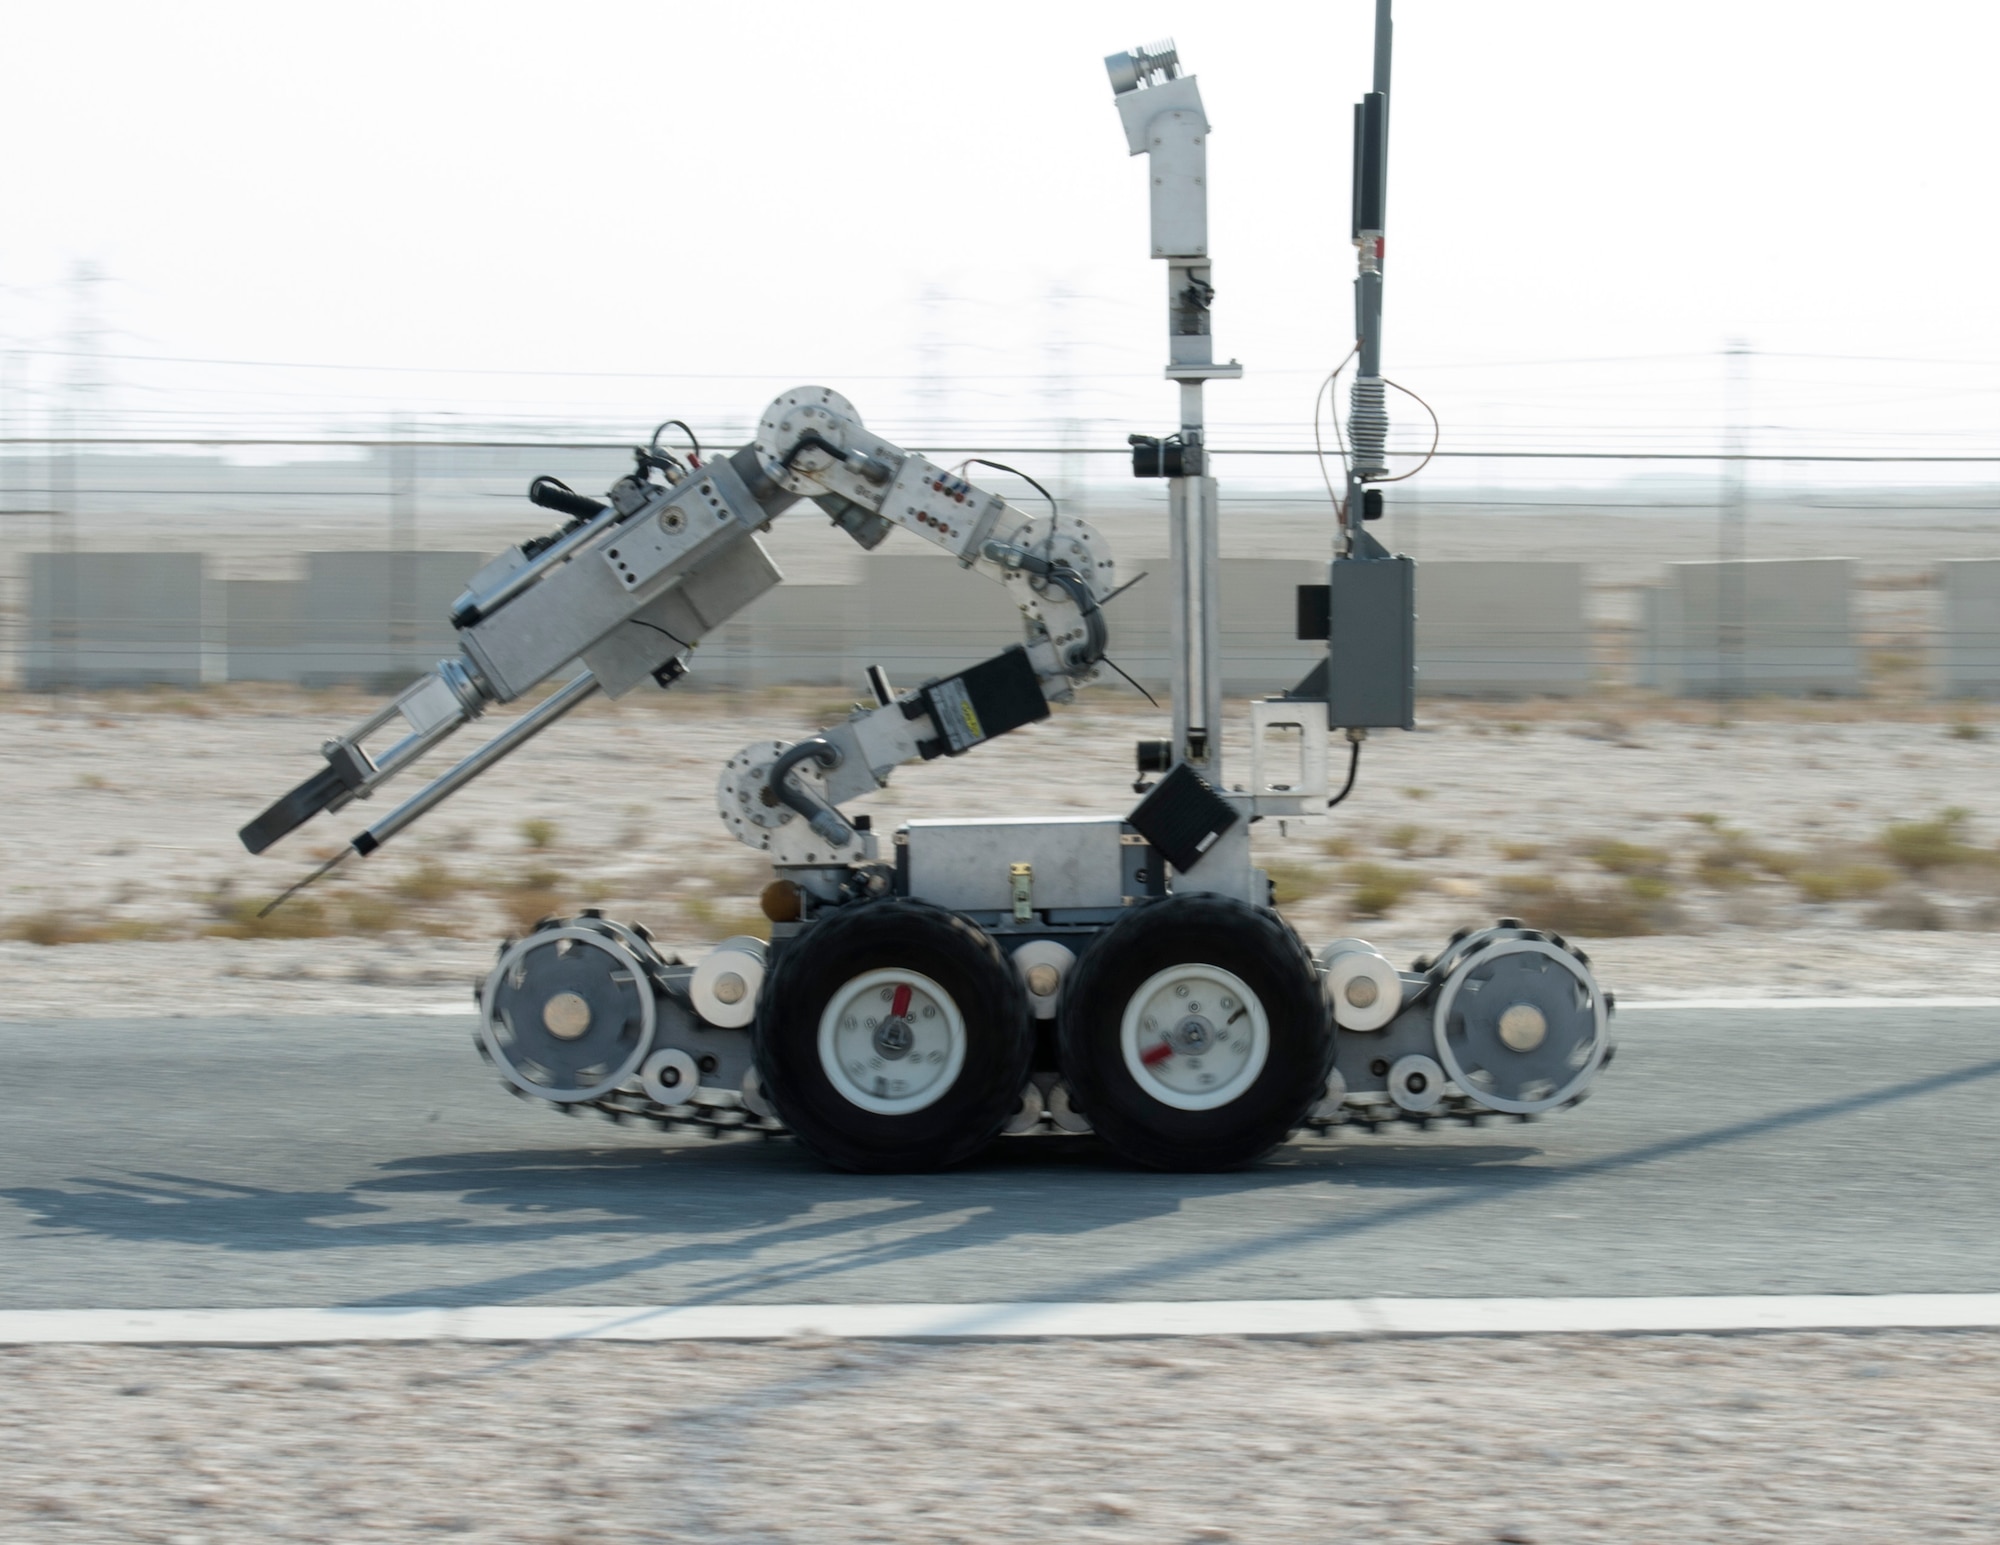 A Remotec ANDROS F6A heavy-duty robot with the 379th Expeditionary Civil Engineer Squadron Explosive Ordnance Disposal Flight travels to the vehicle search exercise location at Al Udeid Air Base, Qatar, Aug. 26, 2017.